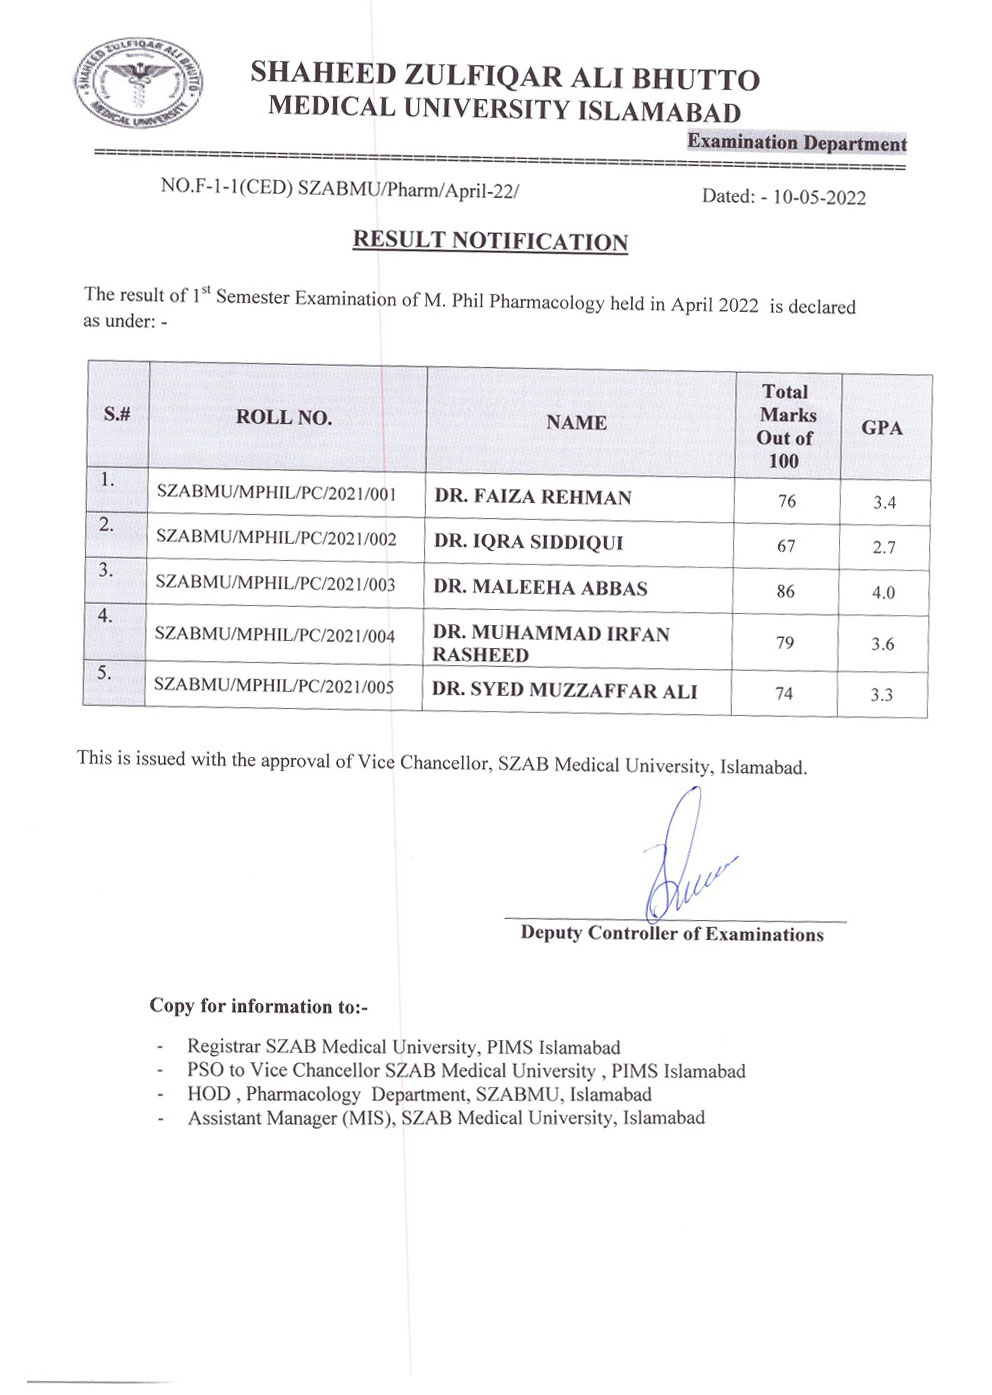 Result Notification - 1st Semester M.Phil. Pharmacology held in April 2022